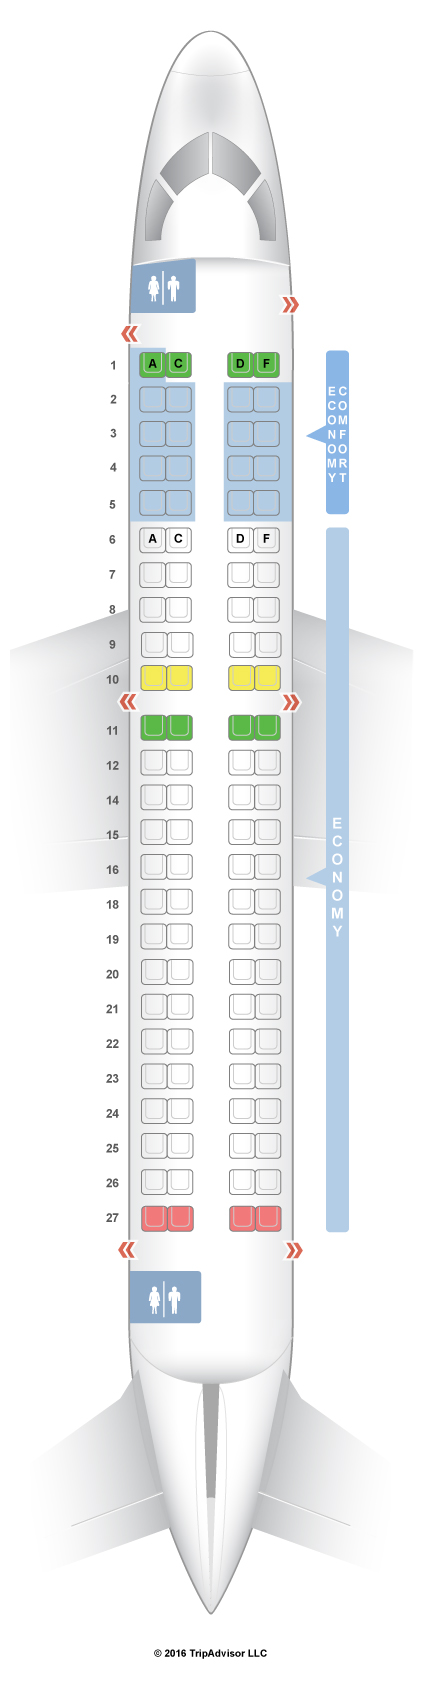 Embraer E190 Seating Chart